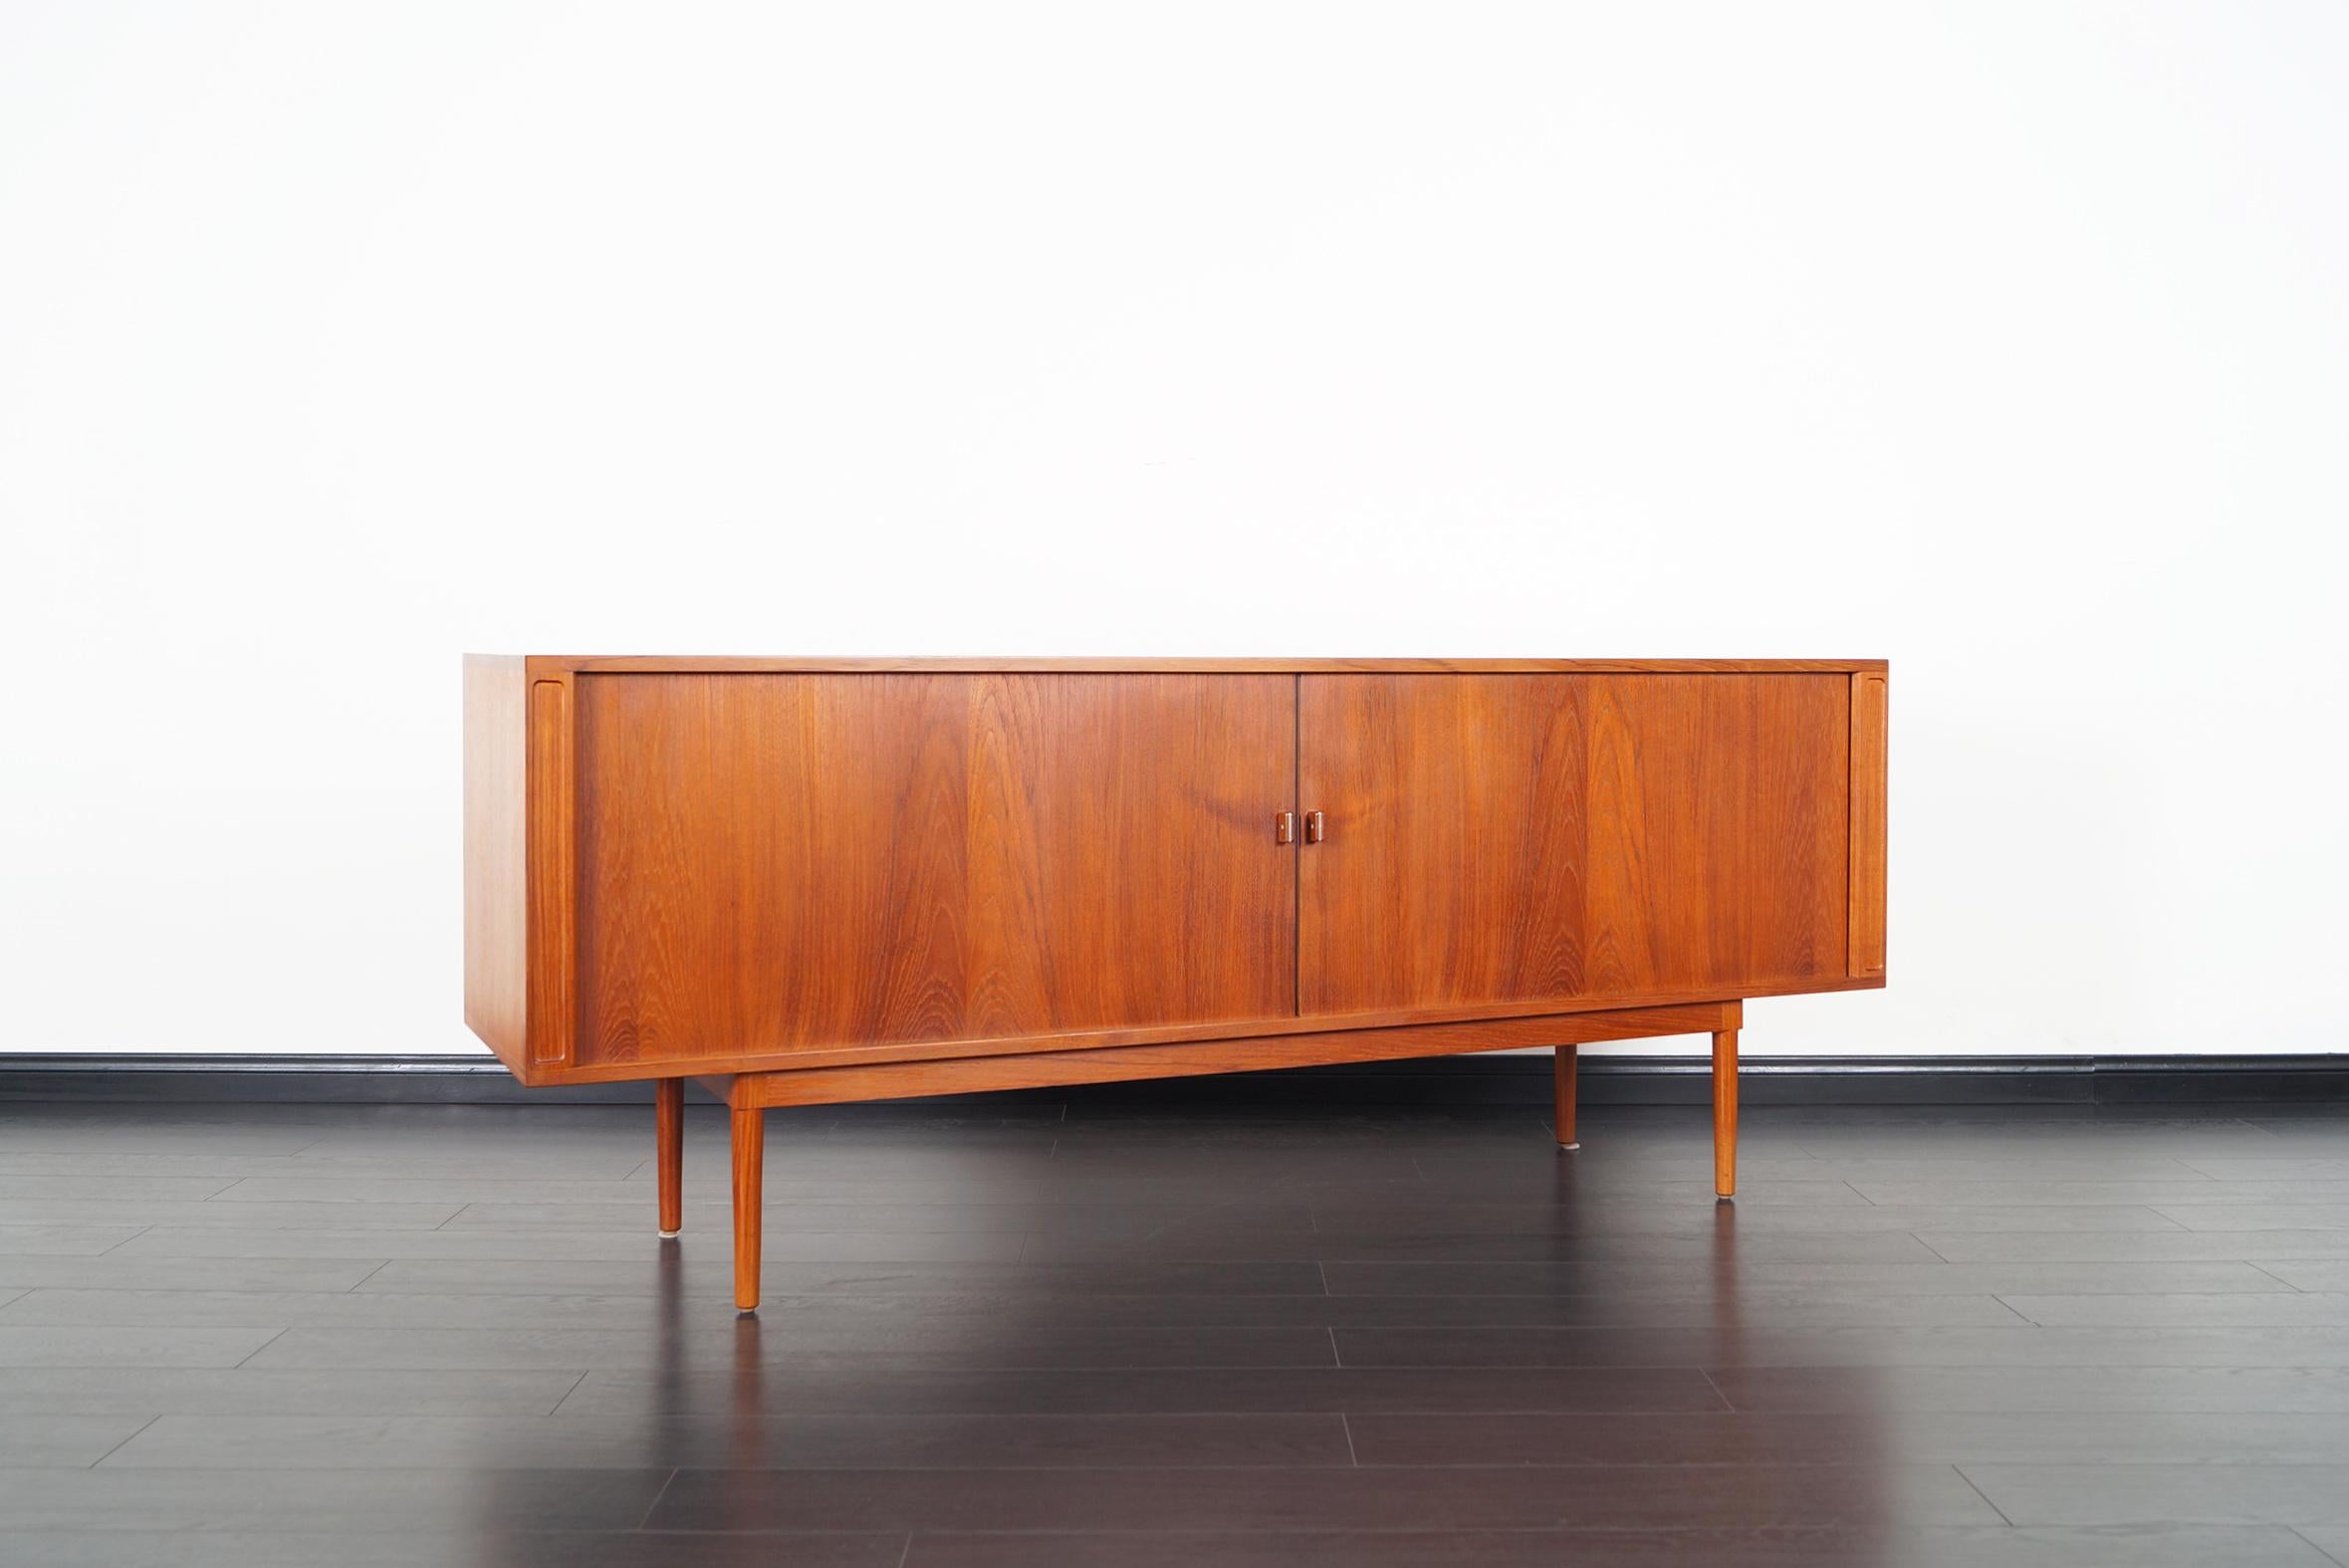 Elegant Danish modern tambour door credenza designed by Peter Løvig Nielsen for Løvig design. Features two sliding tambour doors that smoothly open up to three sections. The middle section has five dovetailed trays. On each side there's one